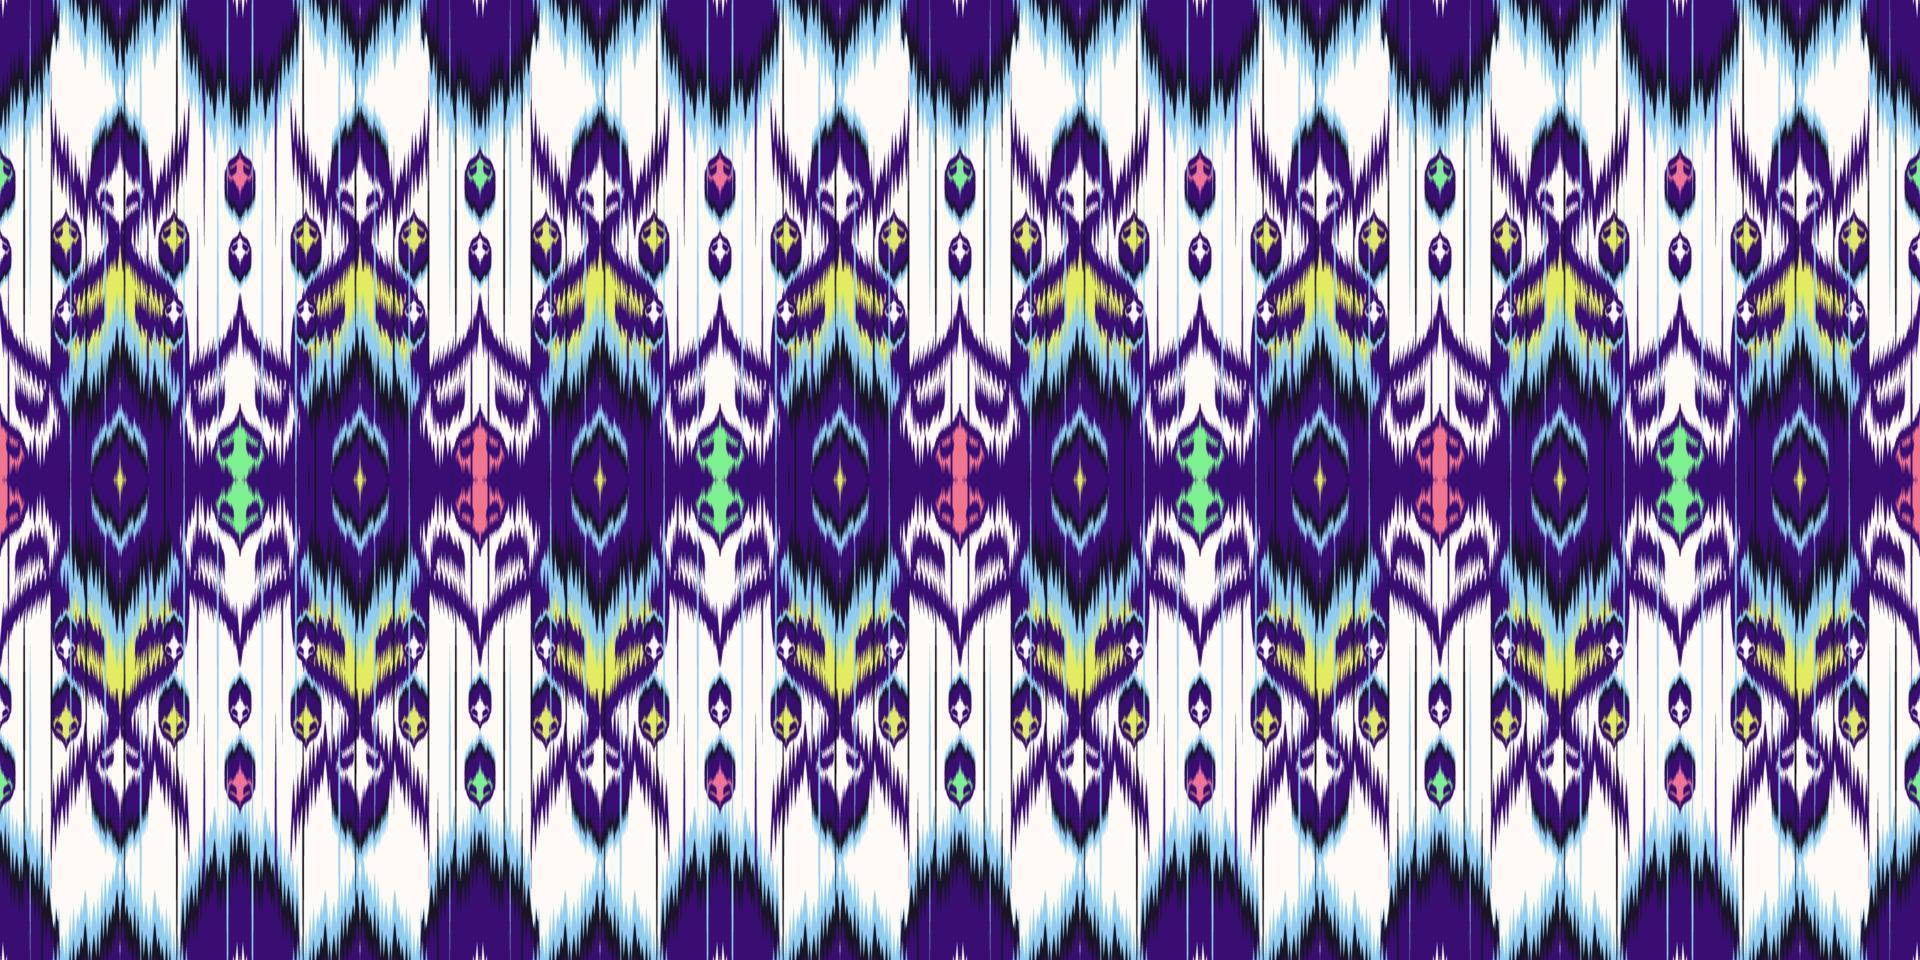 Ethnic fabric pattern Designed from geometric shapes Ethnic Asian style fabric pattern Used for home decoration, carpet work, indoor and outdoor use. vector